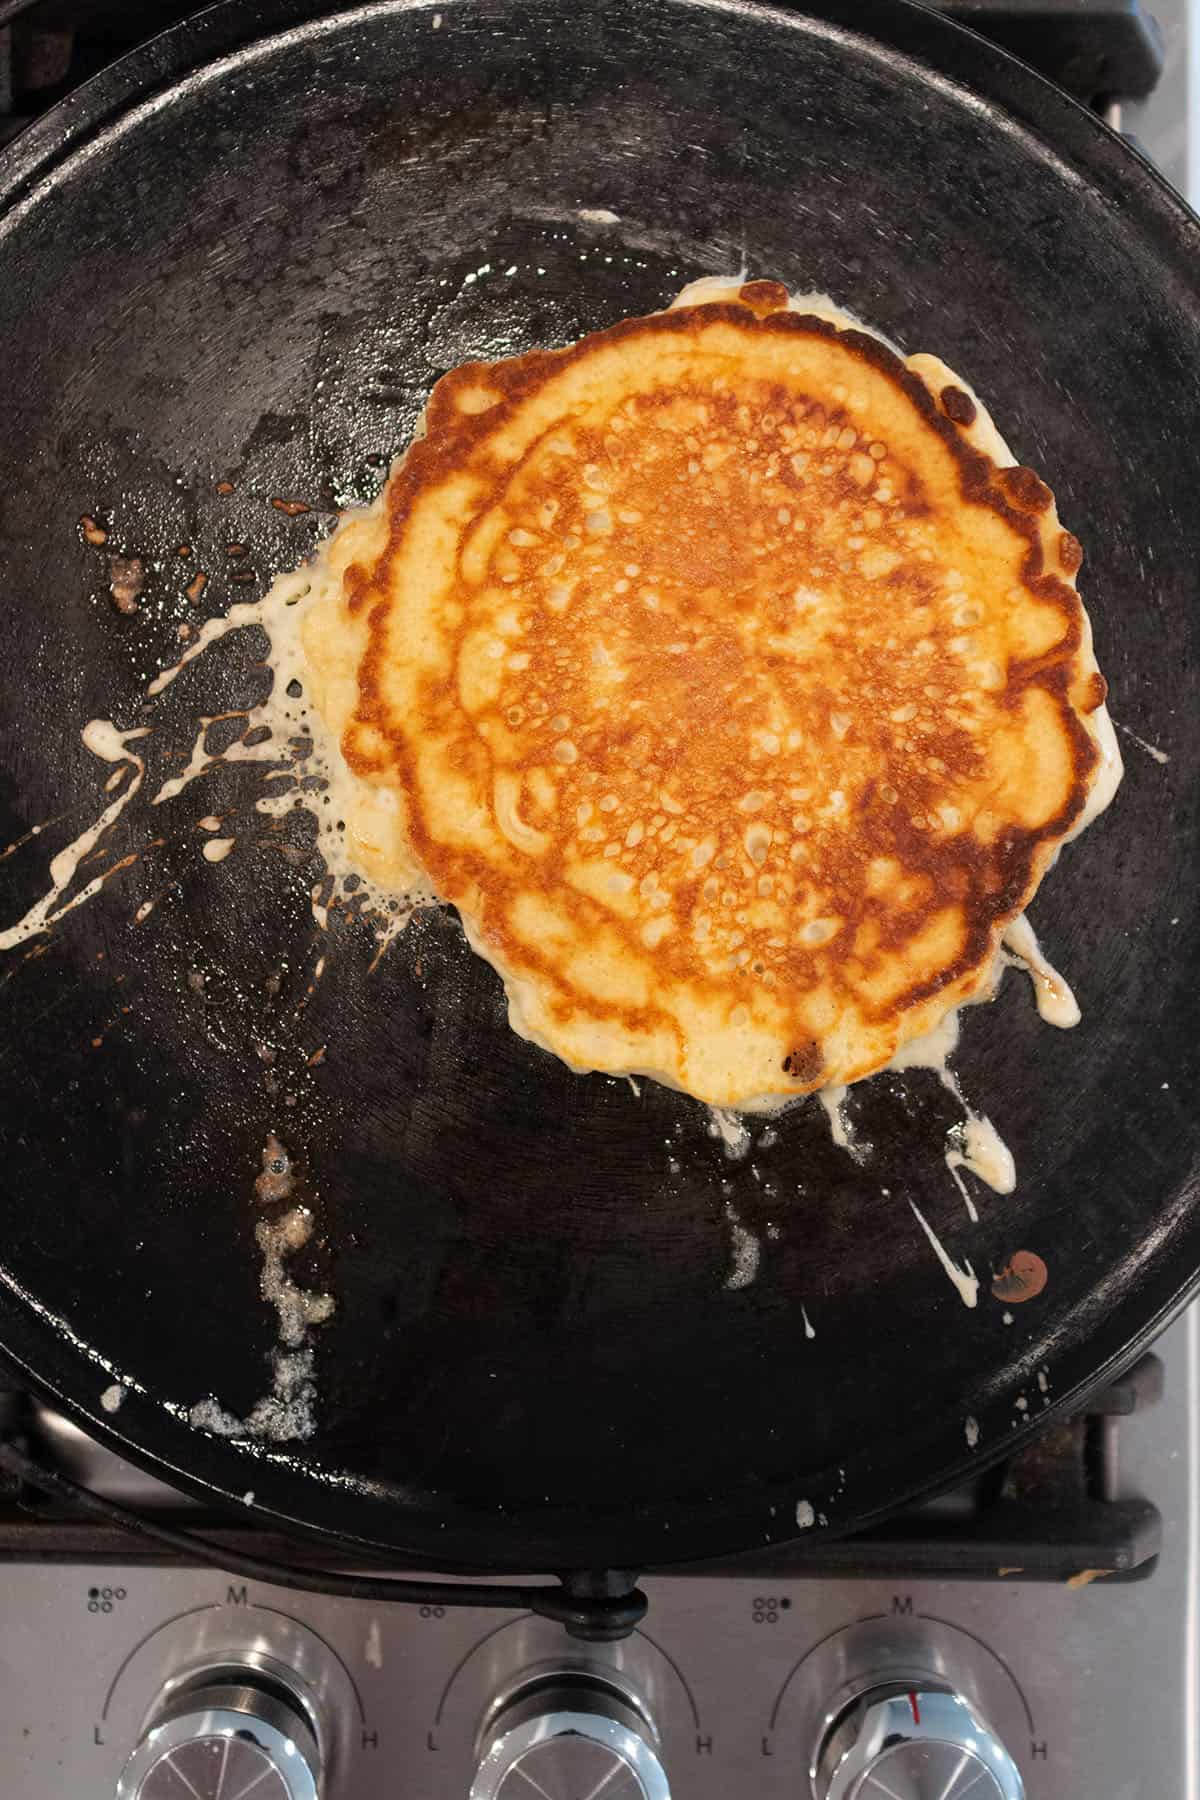 Sourdough pancake being cooked on a cast iron griddle.